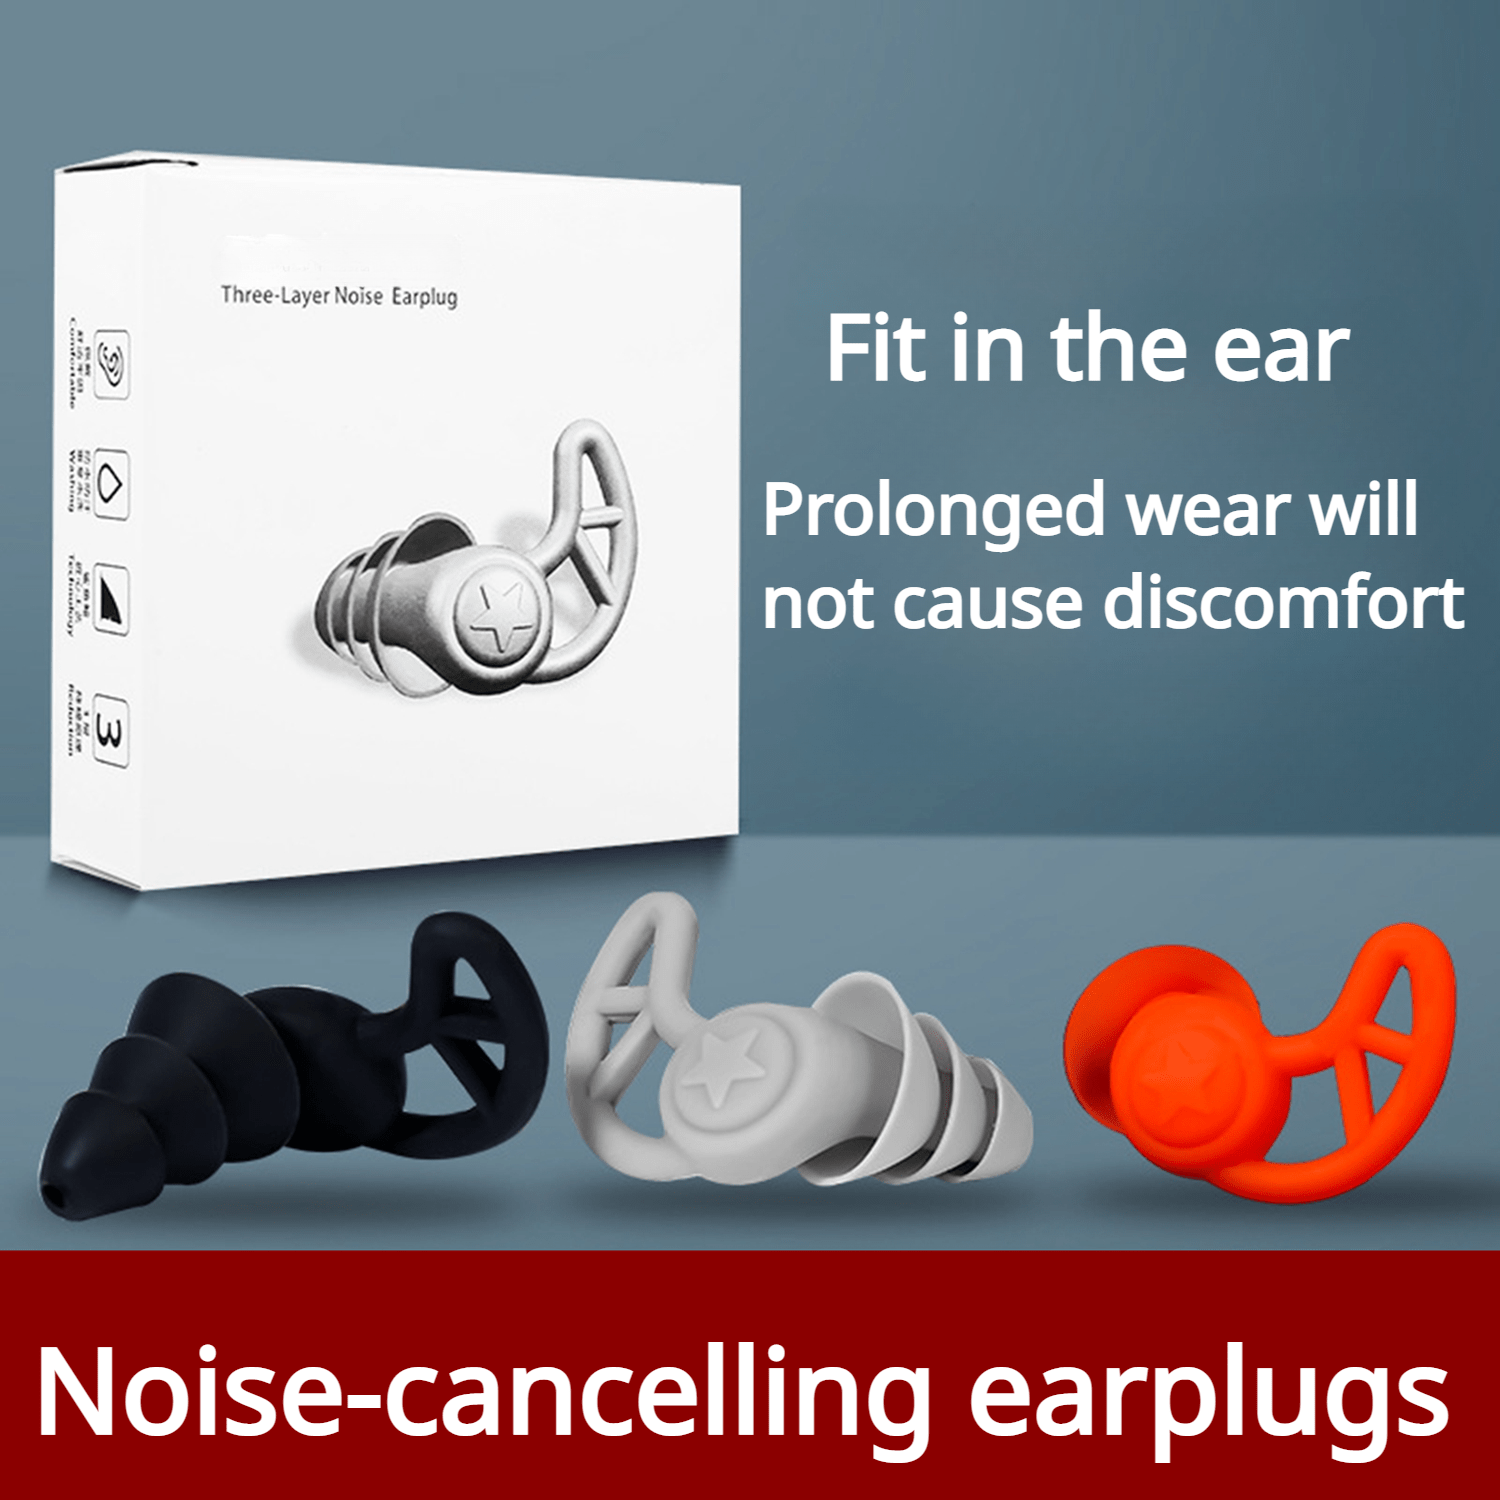 Loop Quiet Earplugs - Soft Silicone, Reusable, Noise Reduction - 8 Tips,  26dB NRR 14 - For Sleep, Noise Sensitivity